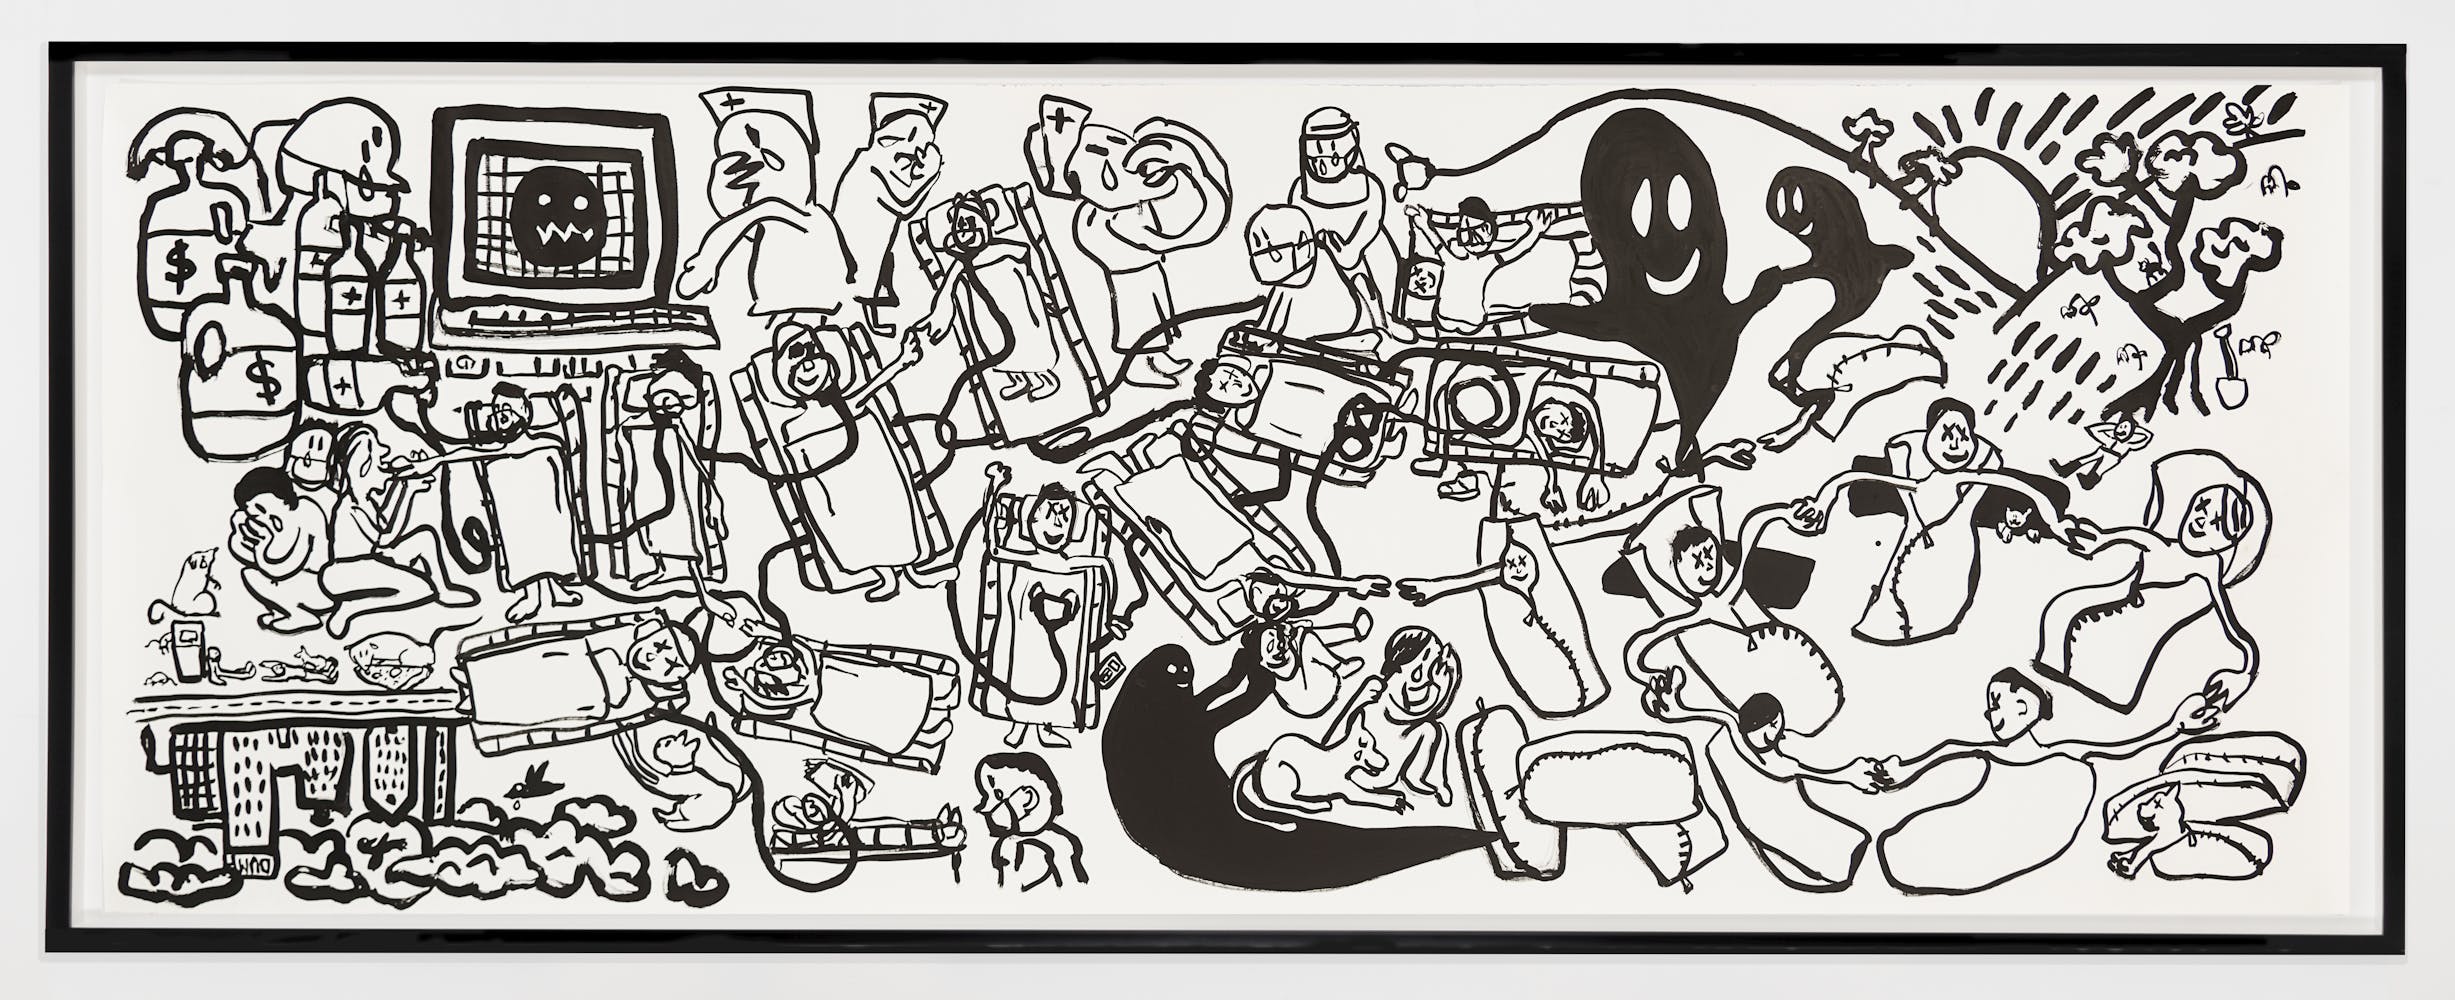 Horizontal black ink drawing of cartoonish figures depicting patients in hospital beds, health professionals, and ghosts